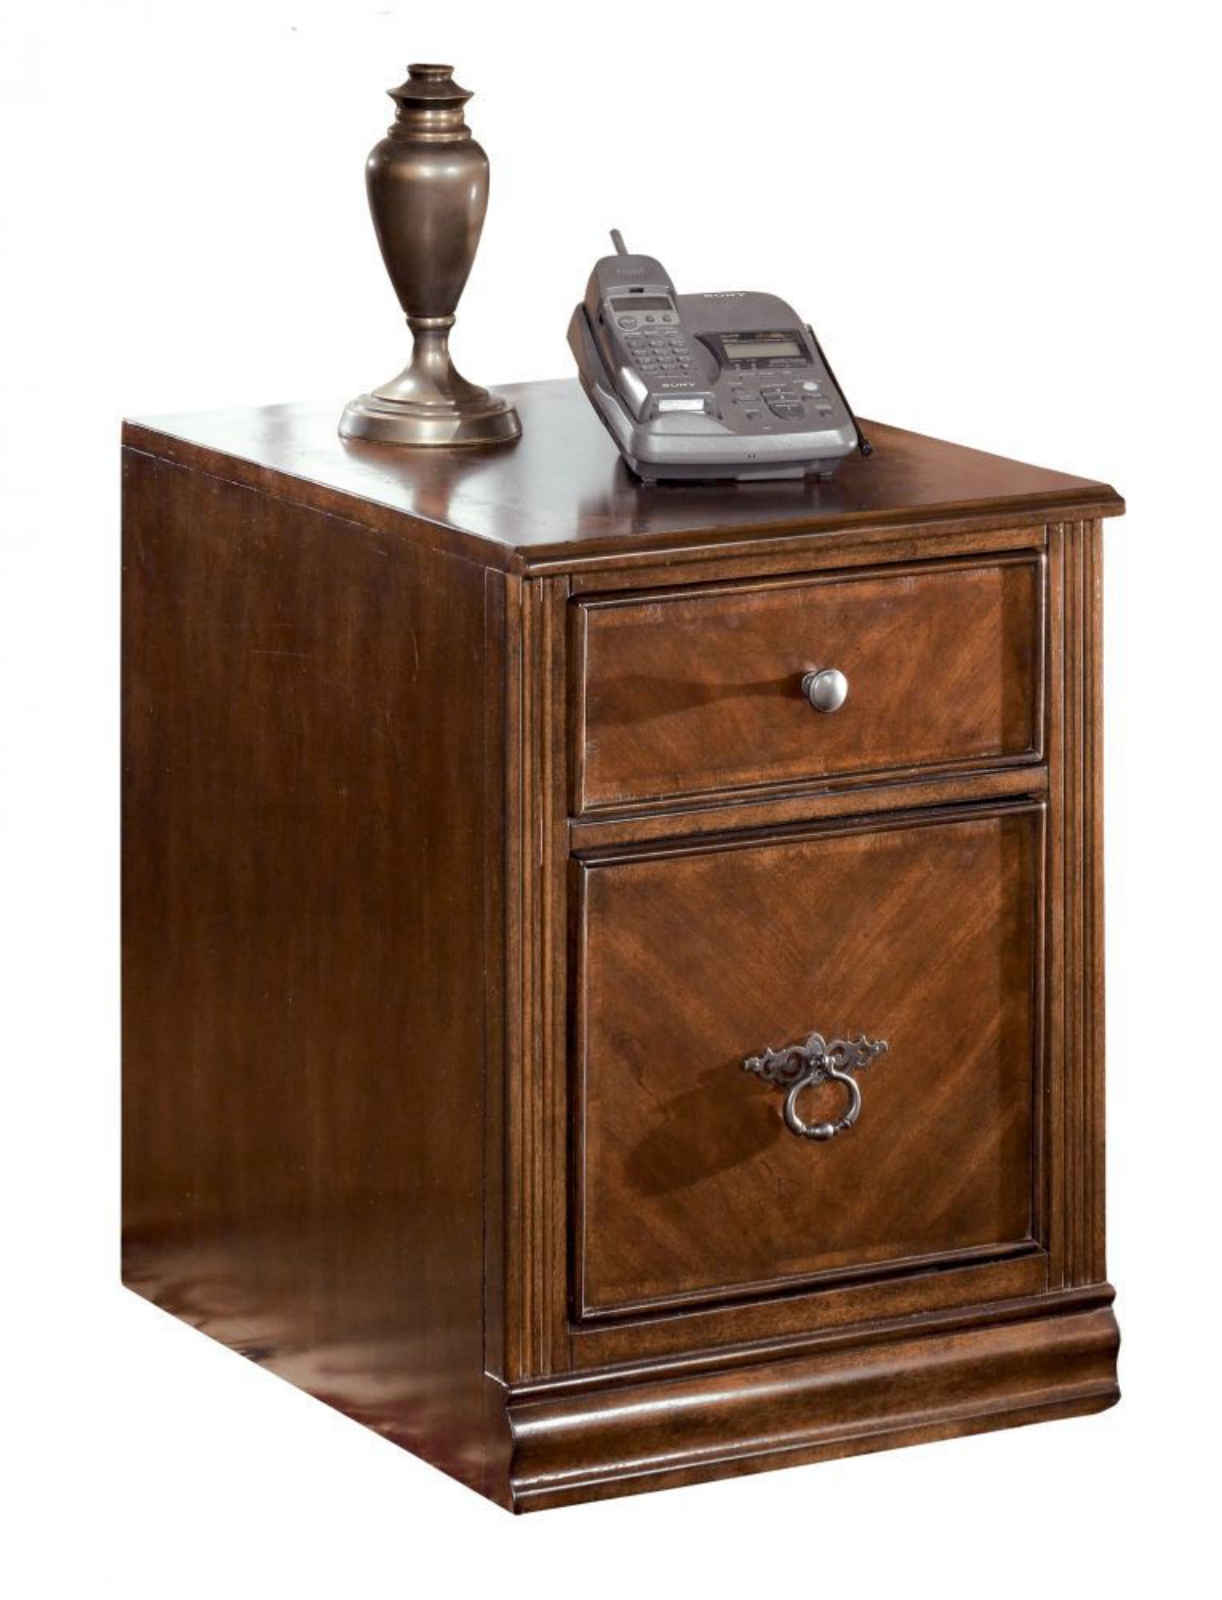 Picture of Hamlyn File Cabinet